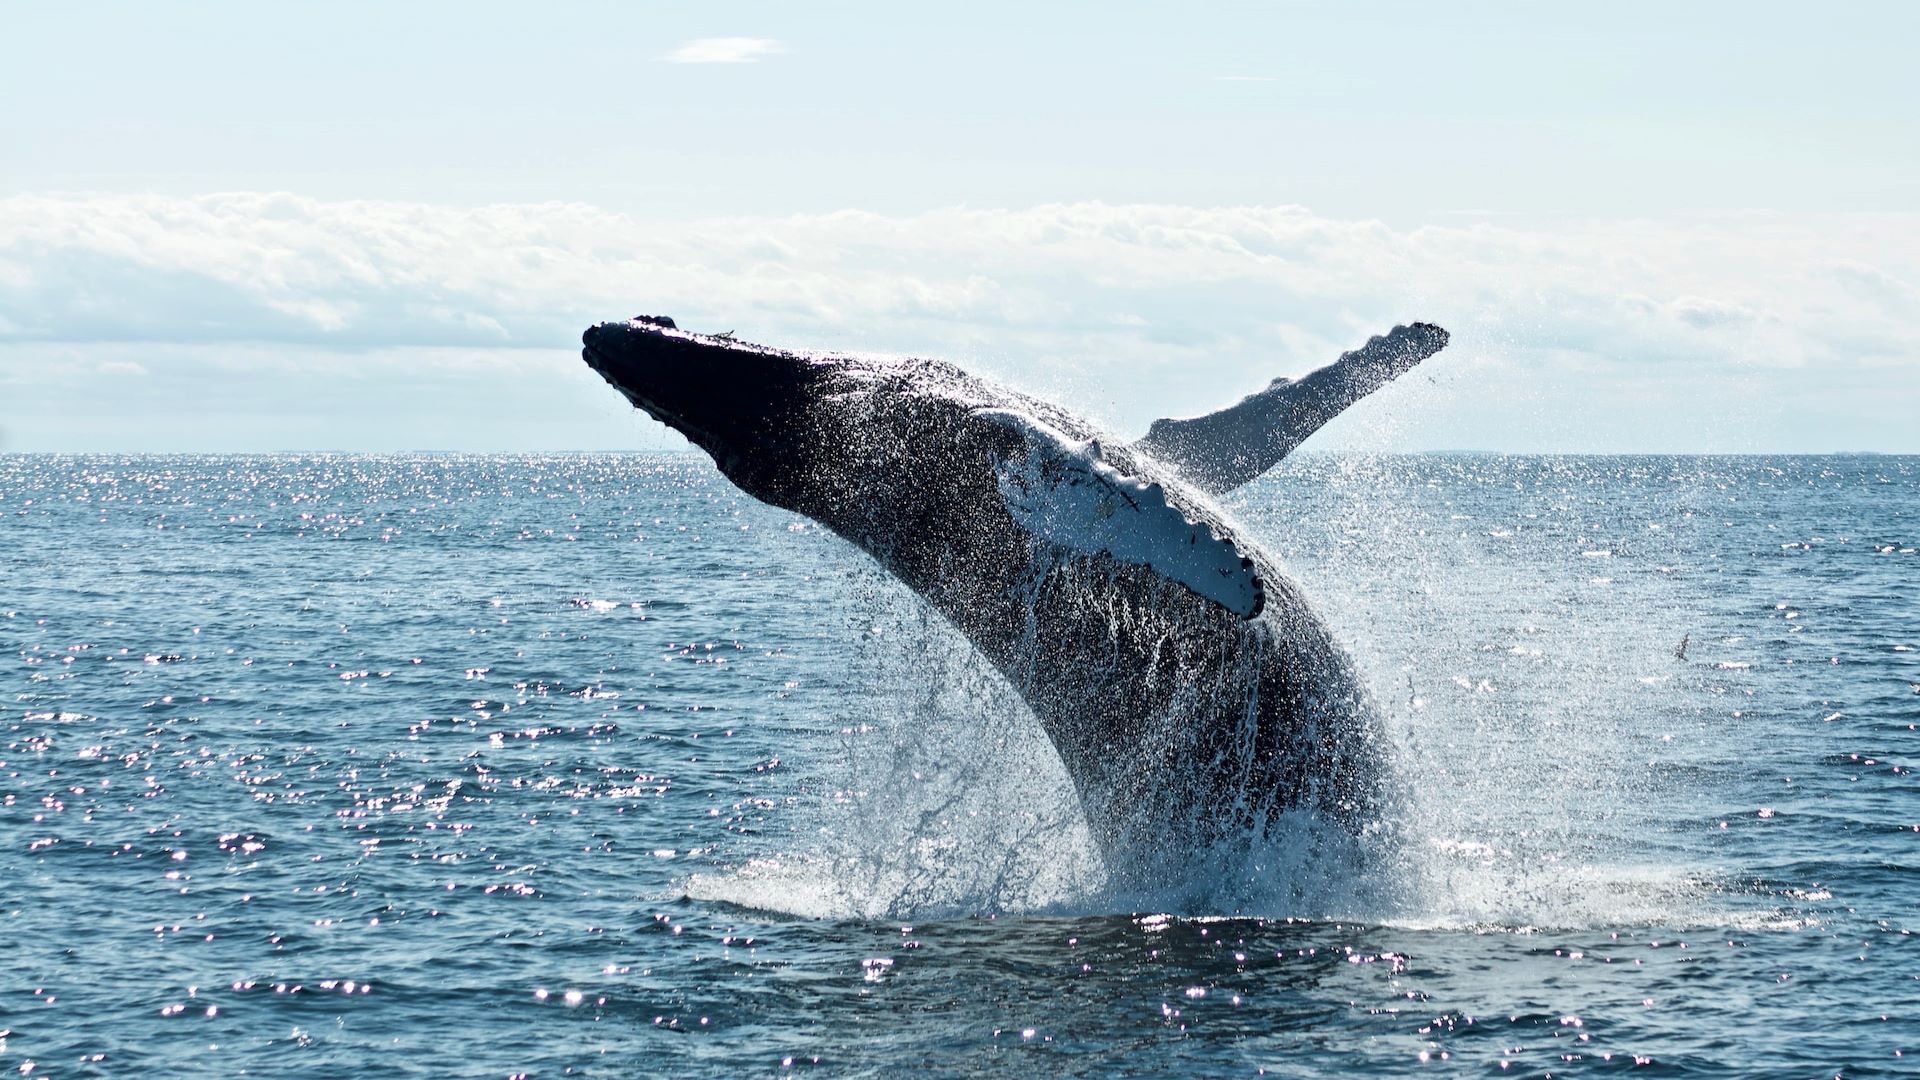 A whale leaps out of the water.